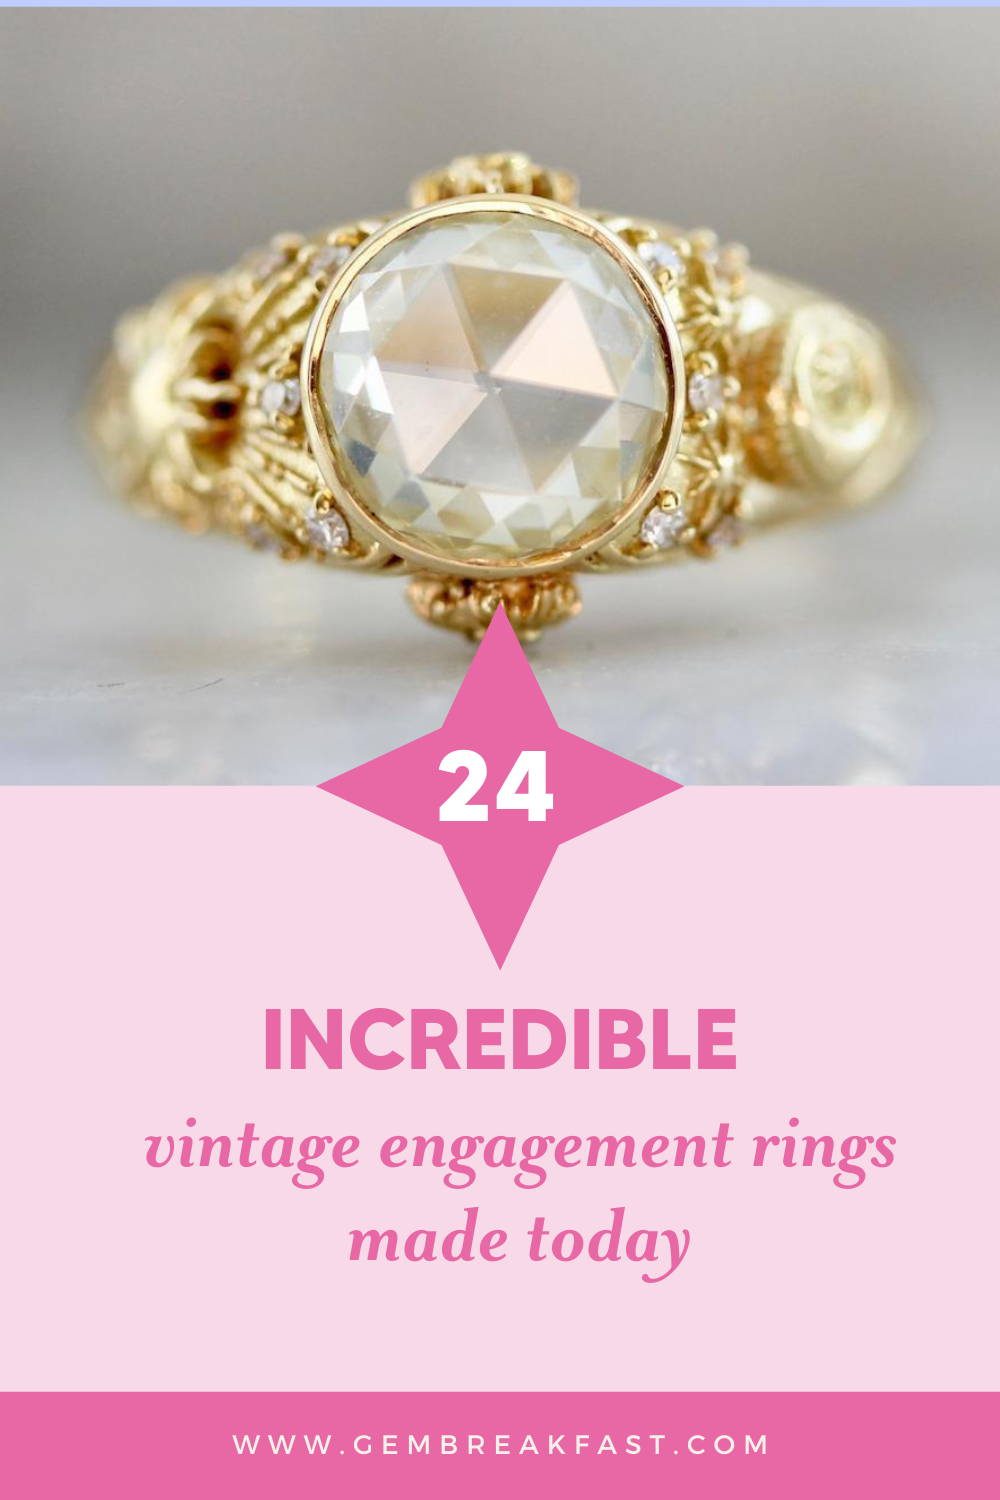 24 irresistibly unique vintage engagement rings made today